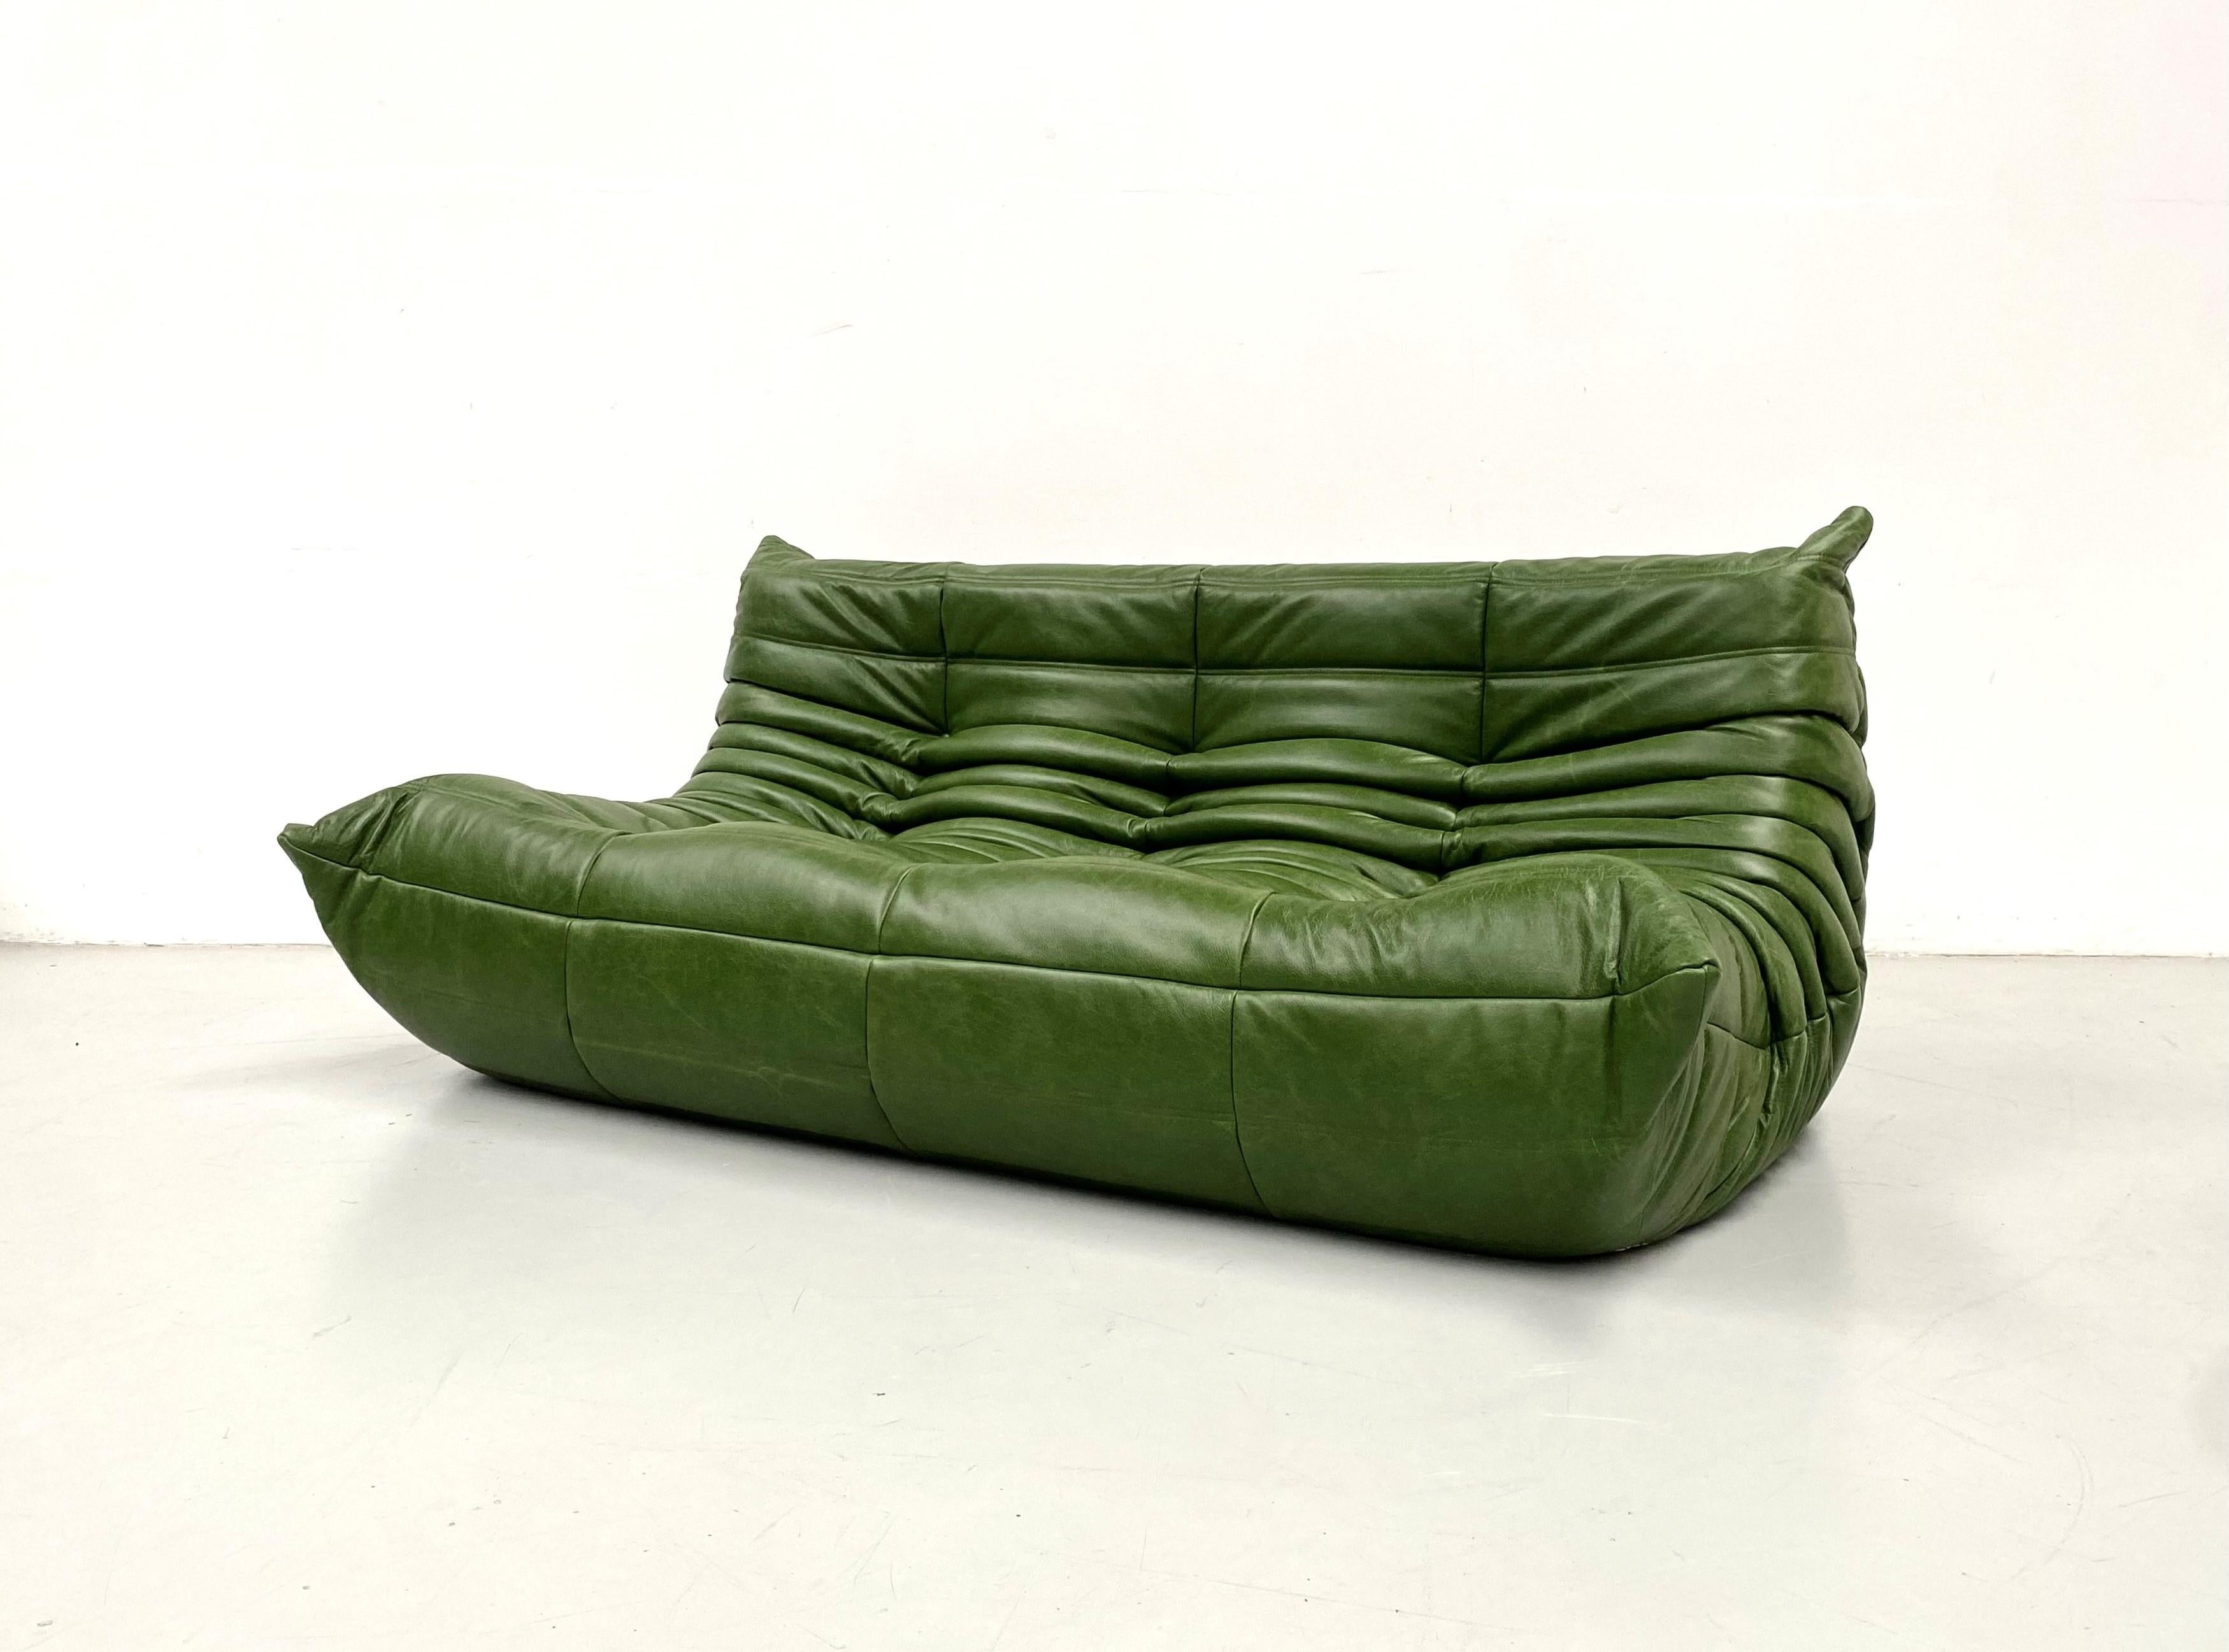 Michel Ducaroy designed the Togo in 1973 for Ligne Roset. This design is over 40 years old but still is until today very popular. The Togo is also the first piece of furniture that's made totally of foam.